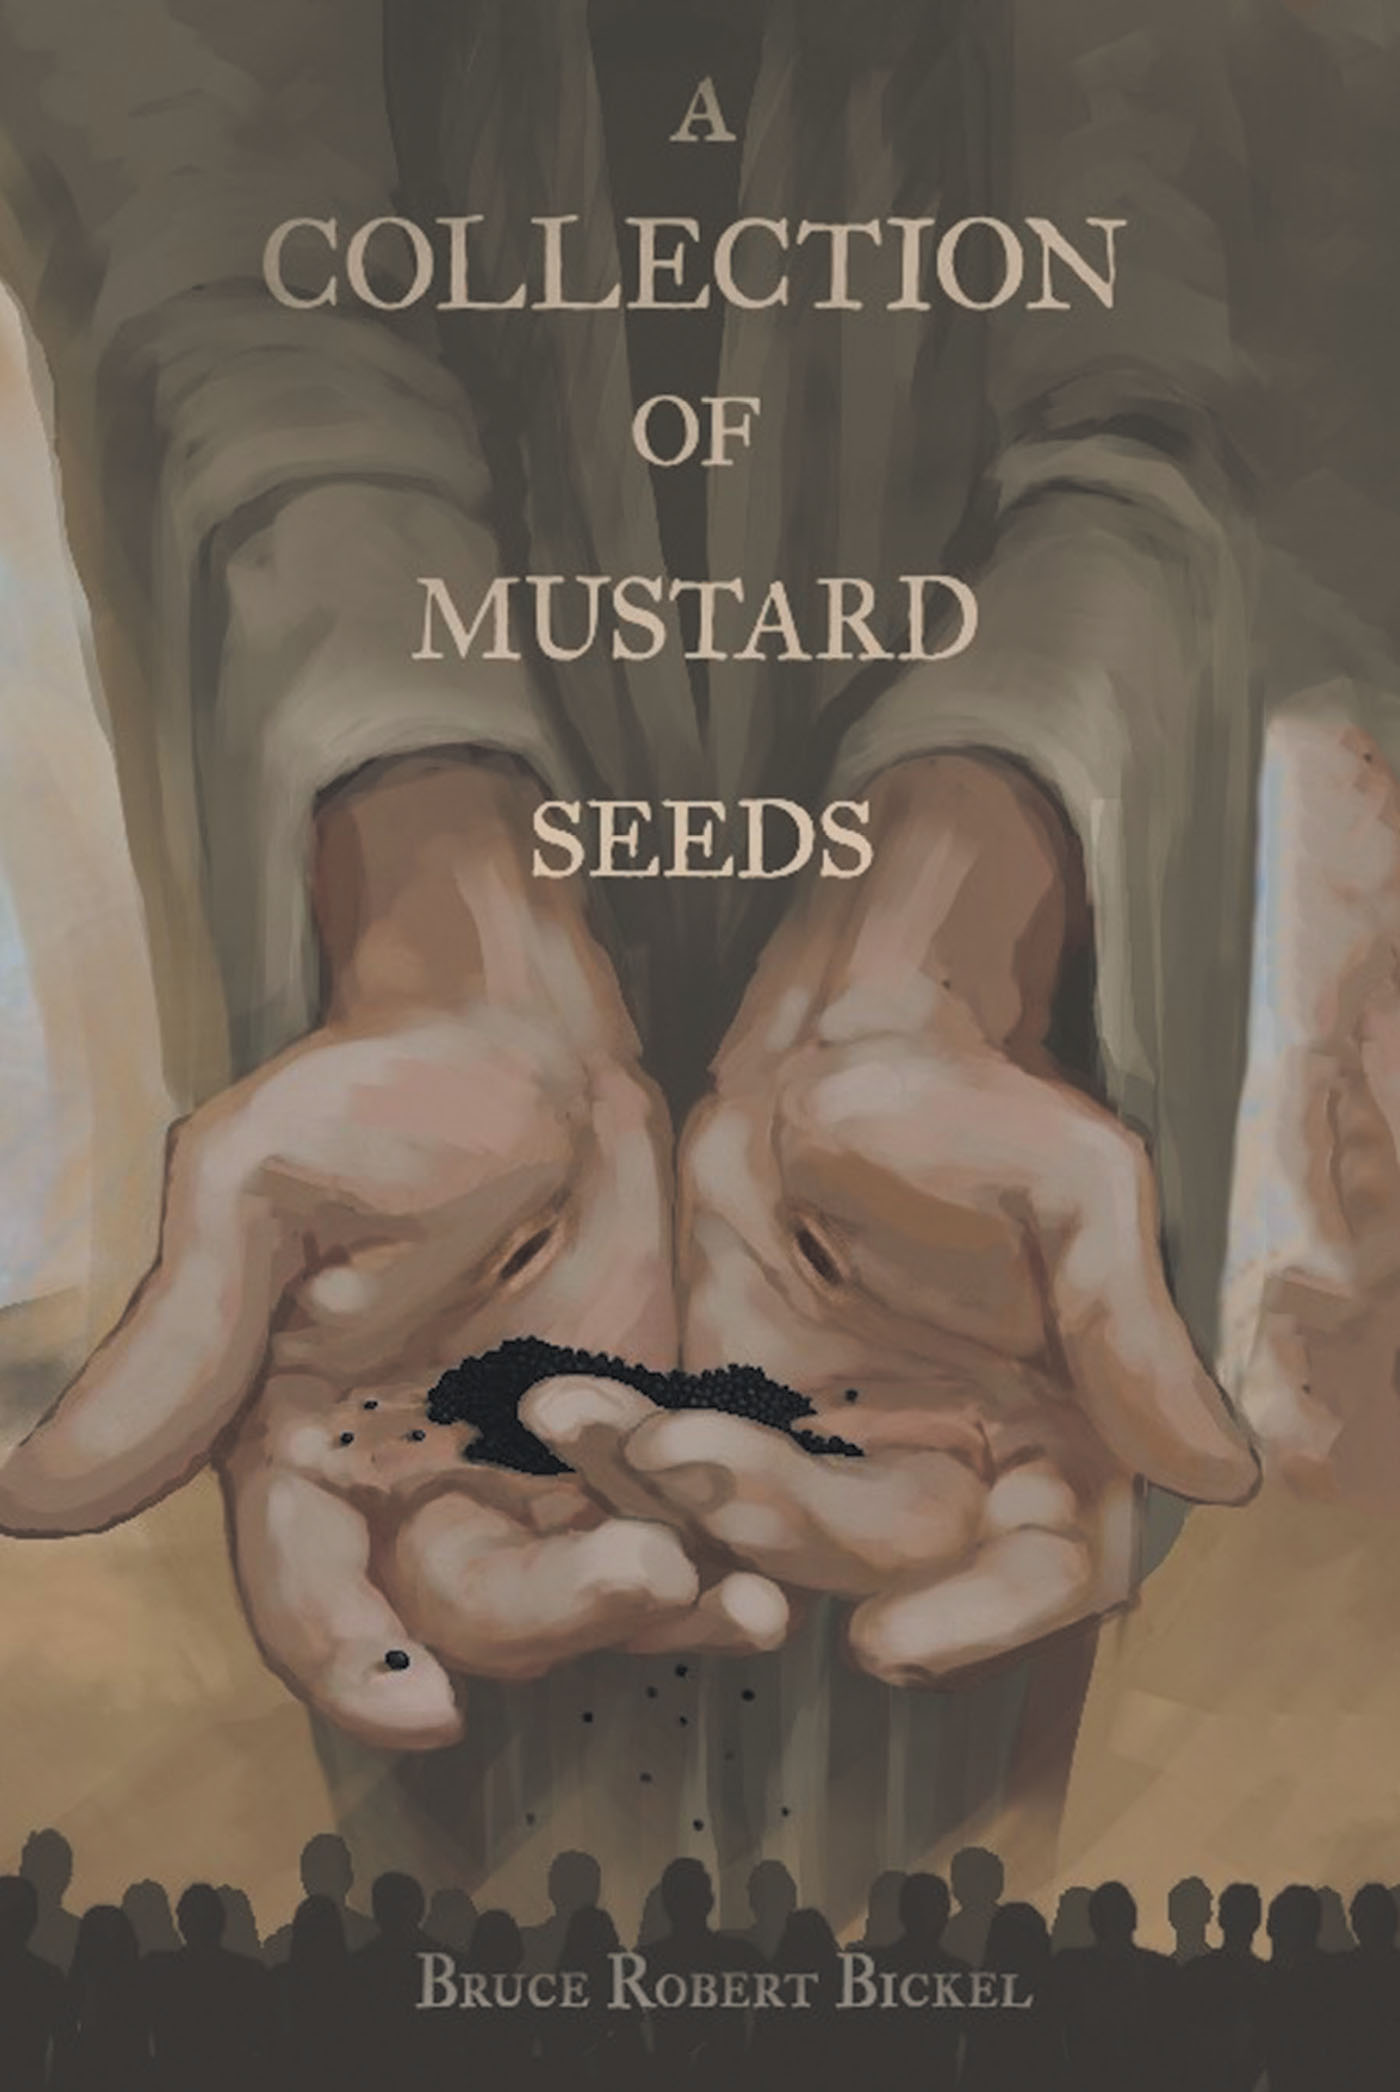 Bruce Robert Bickel’s Newly Released "A Collection of Mustard Seeds" is an Impactful Selection of Thoughtful Writings That Share the Glory of God